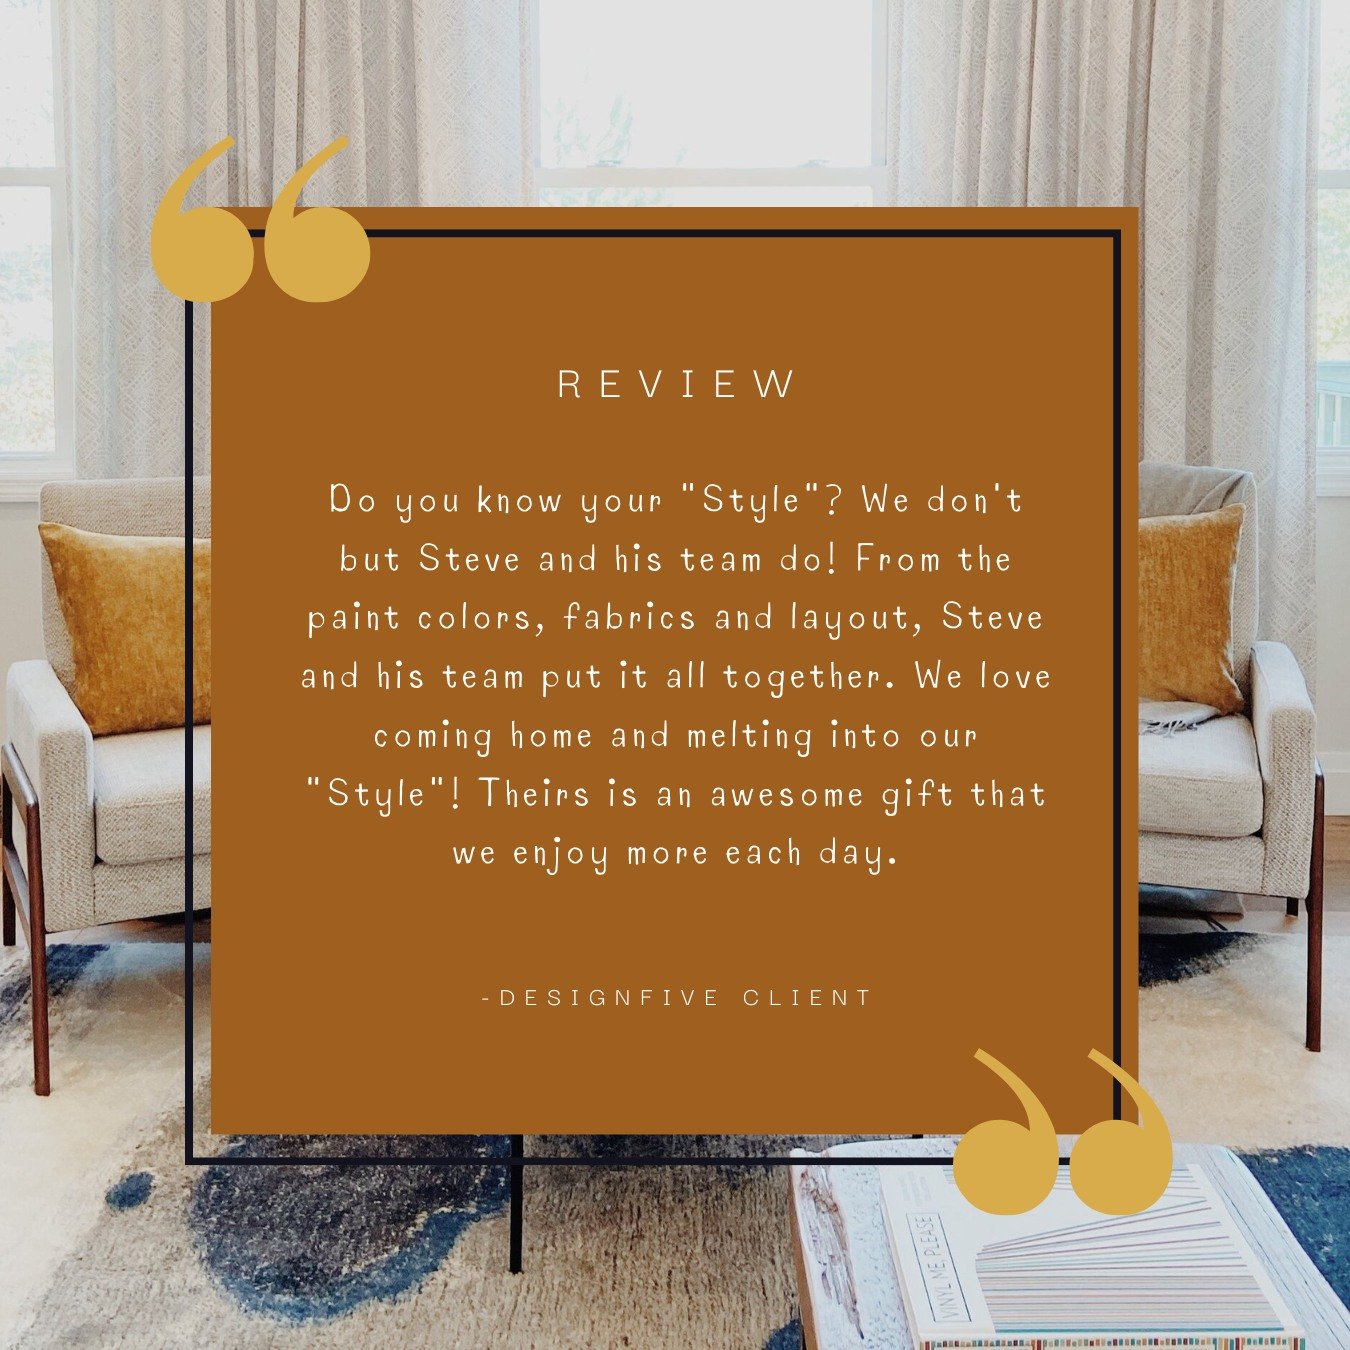 Let&rsquo;s hear what our clients have to say ⤴️ We are so grateful for all of our amazing clients. Getting to work on your homes is a privilege and we are thankful for your trust in us. 💛
.
.
.
#designfive #pittsburgh #pittsburghinteriordesigner #p